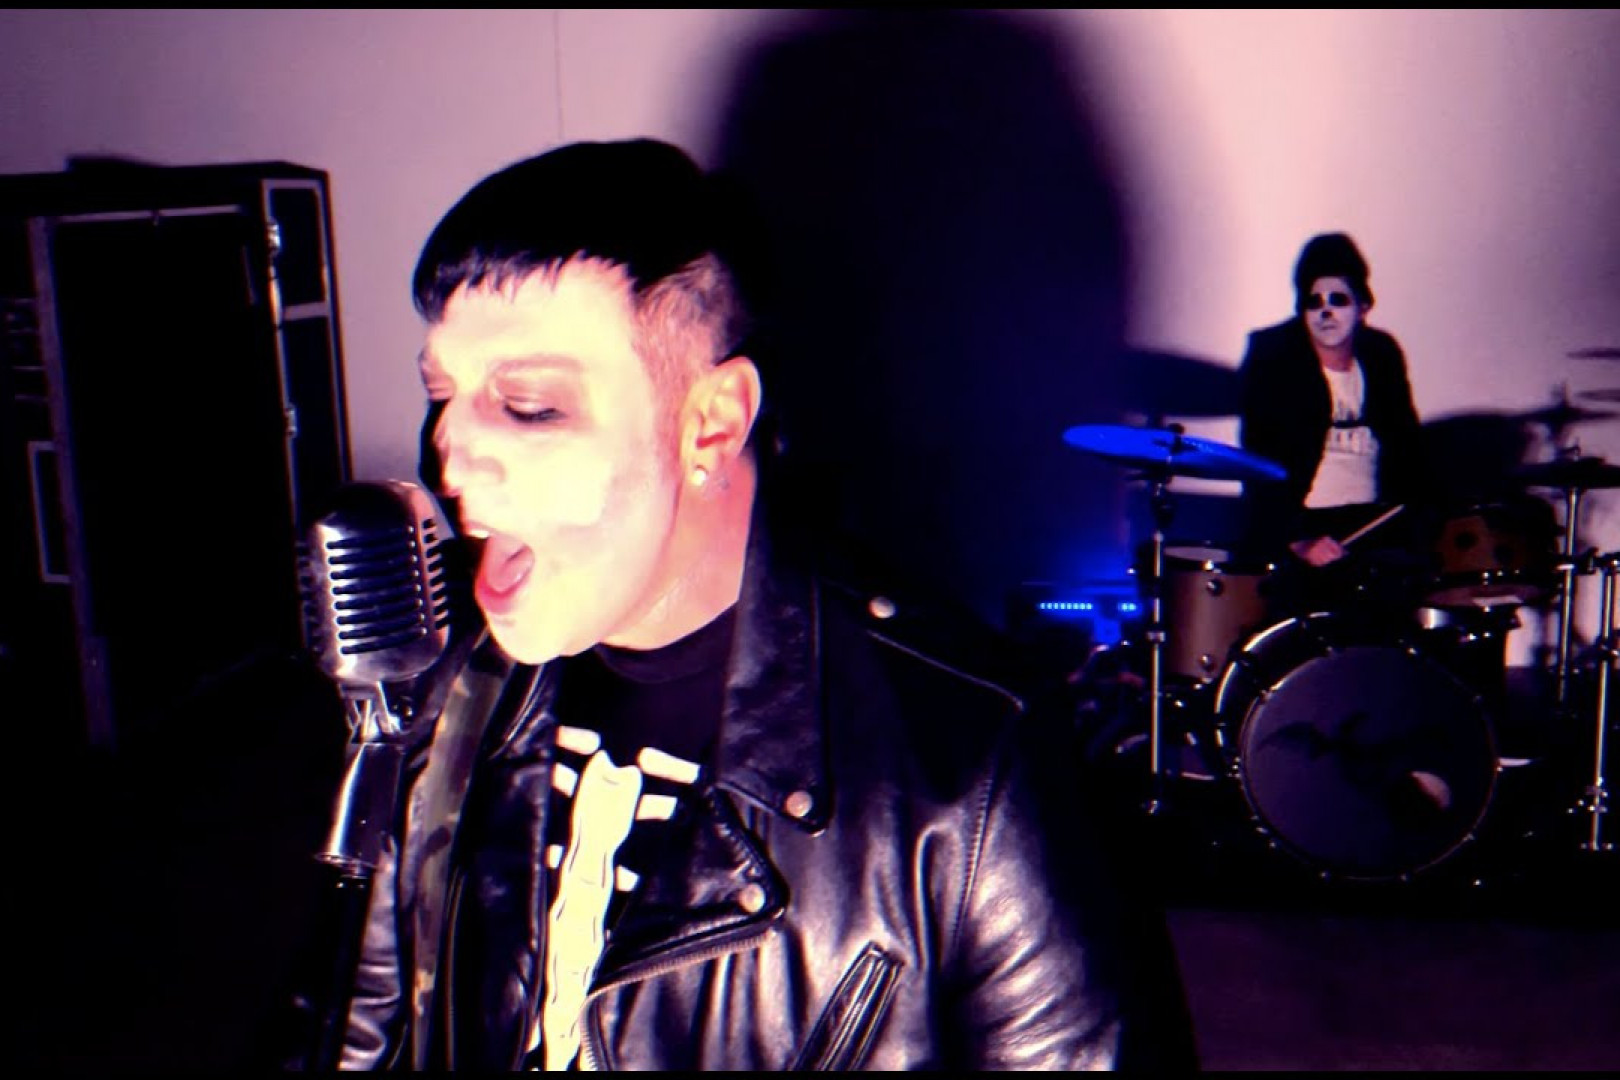 Avenged Sevenfold cover “Last Caress” by The Misfits